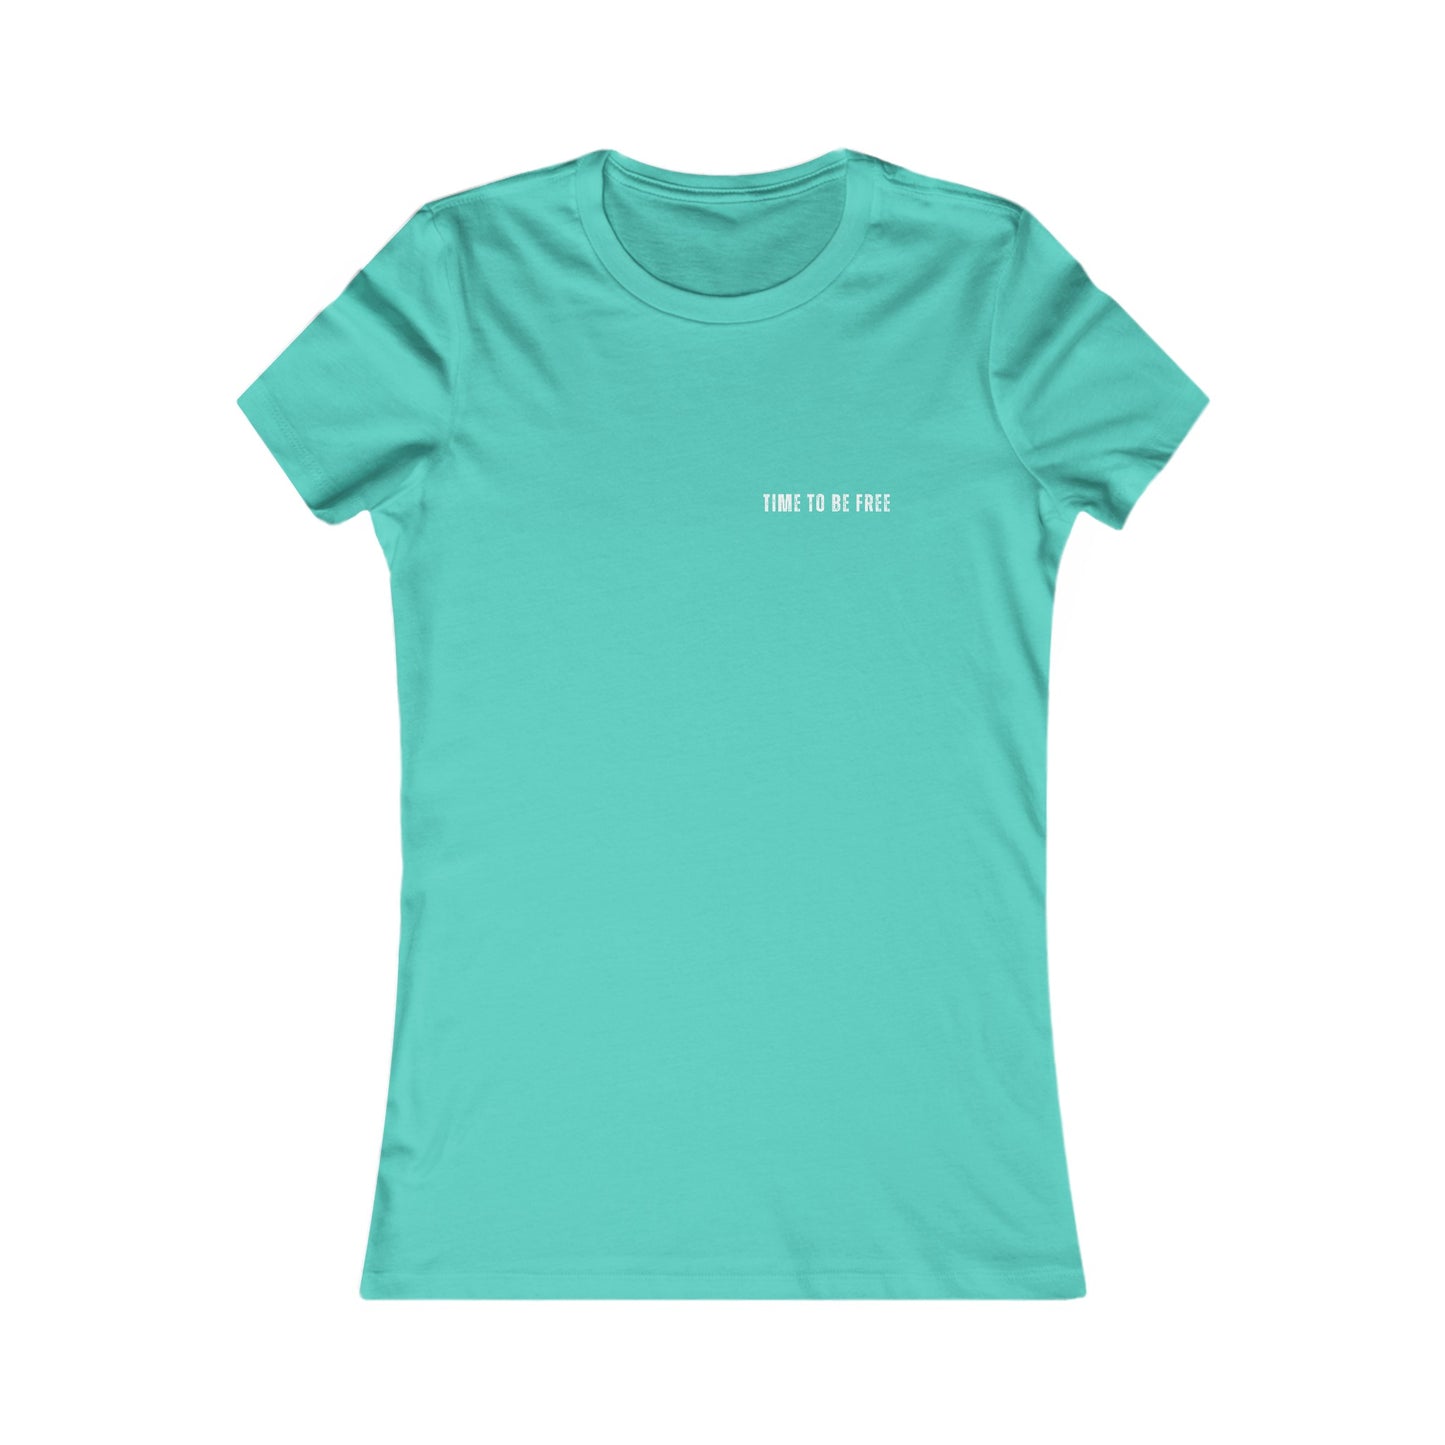 INSPIRED Time To Be Free W WOMEN'S Favorite Tee